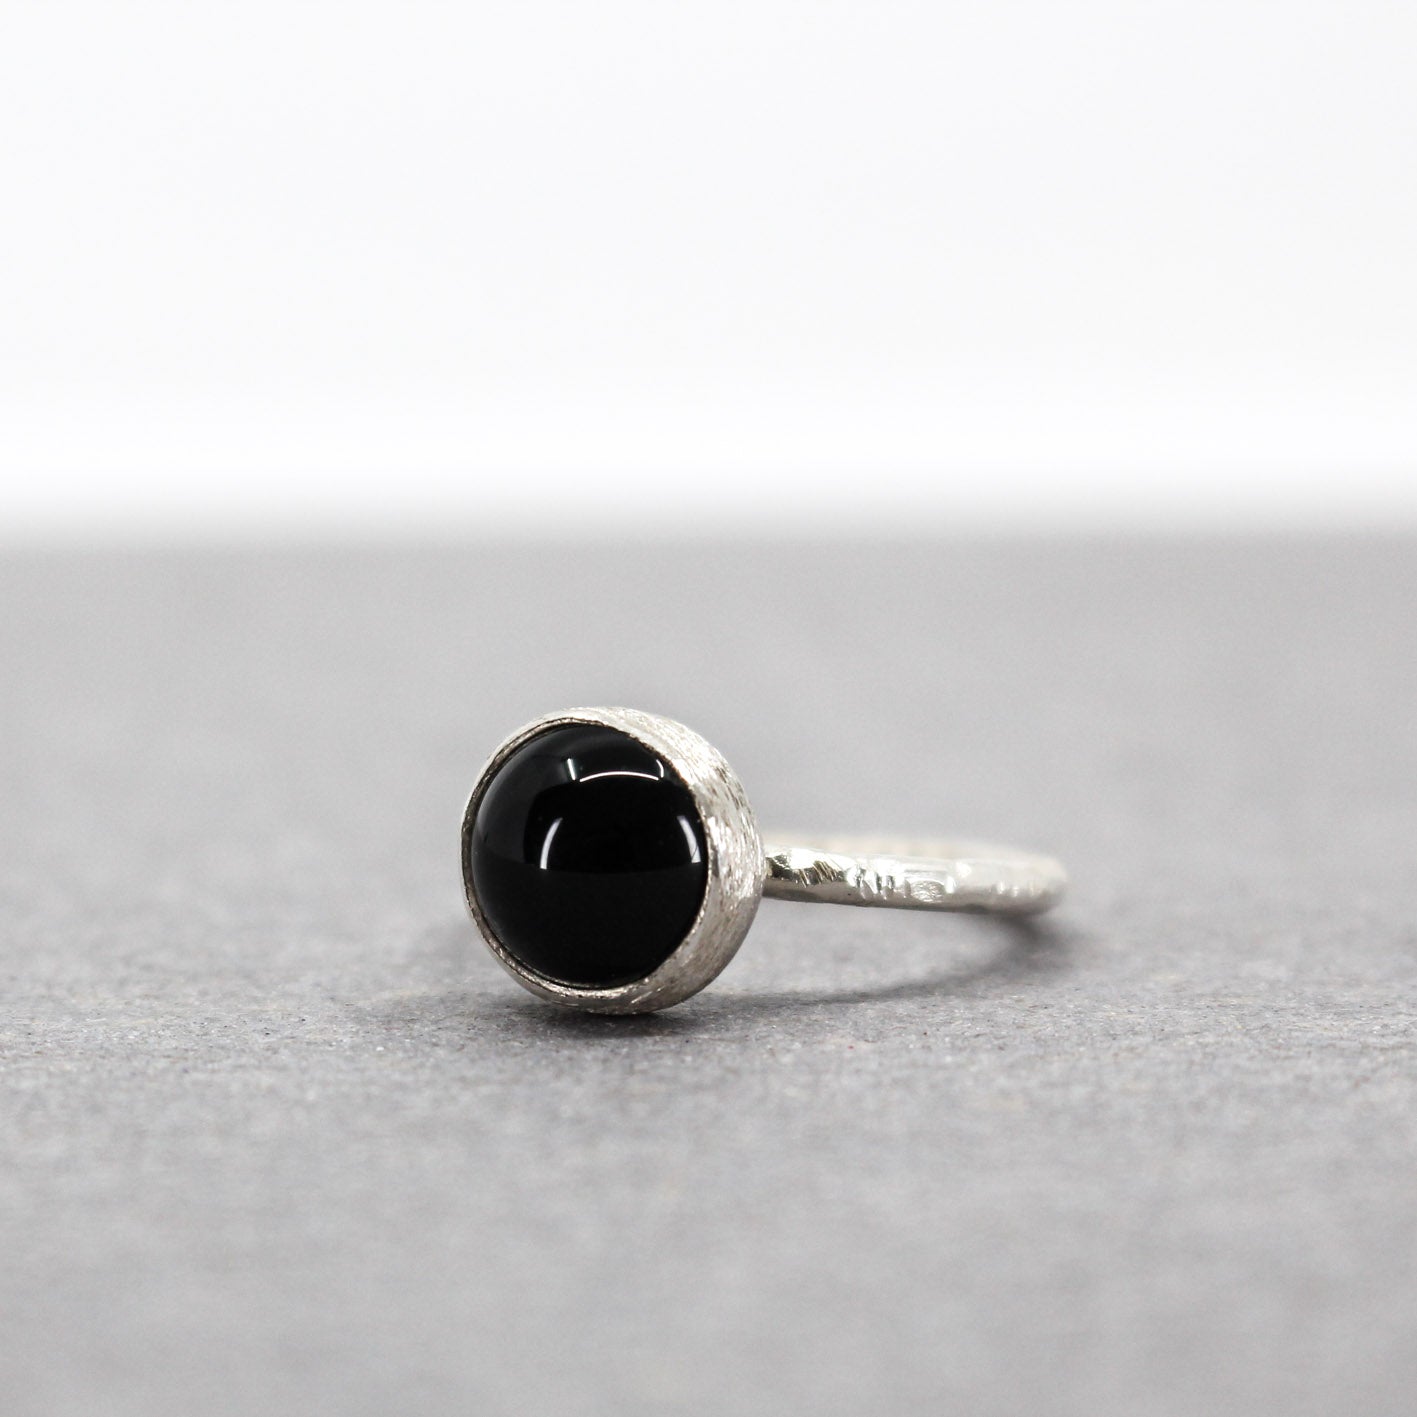 black onyx silver ring with textured round 925 eco sterling silver band • 10 mm onyx